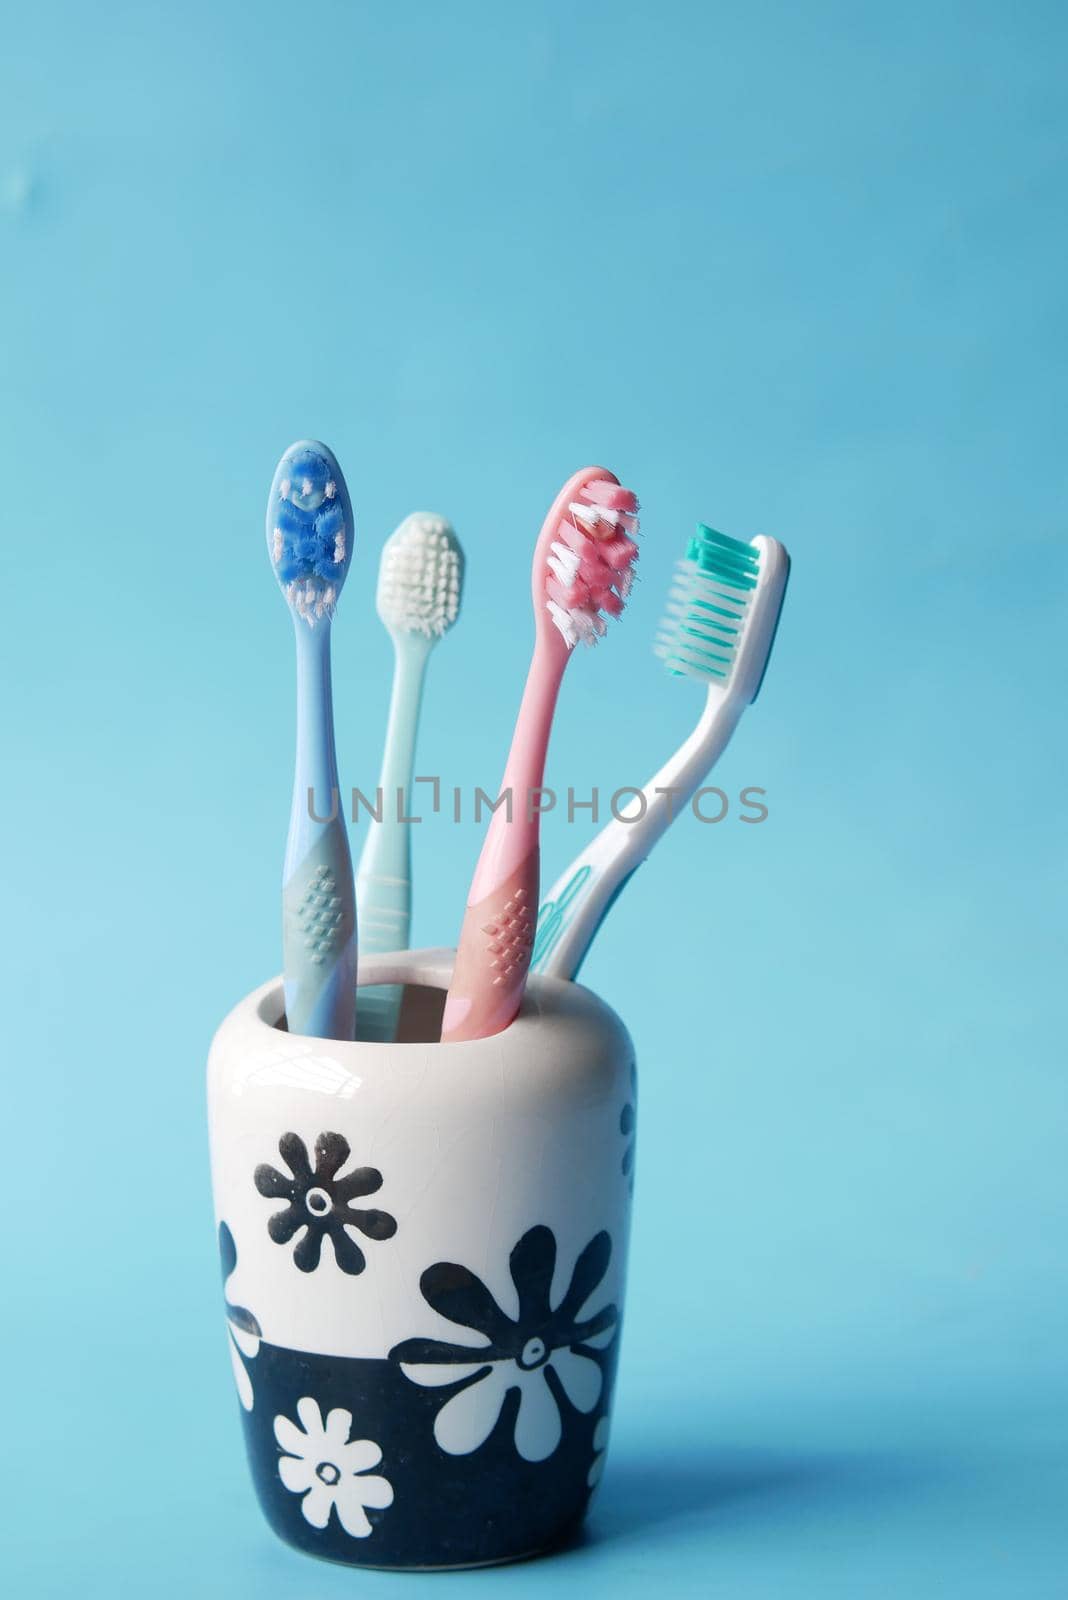 colorful toothbrushes in white mug against blue background .